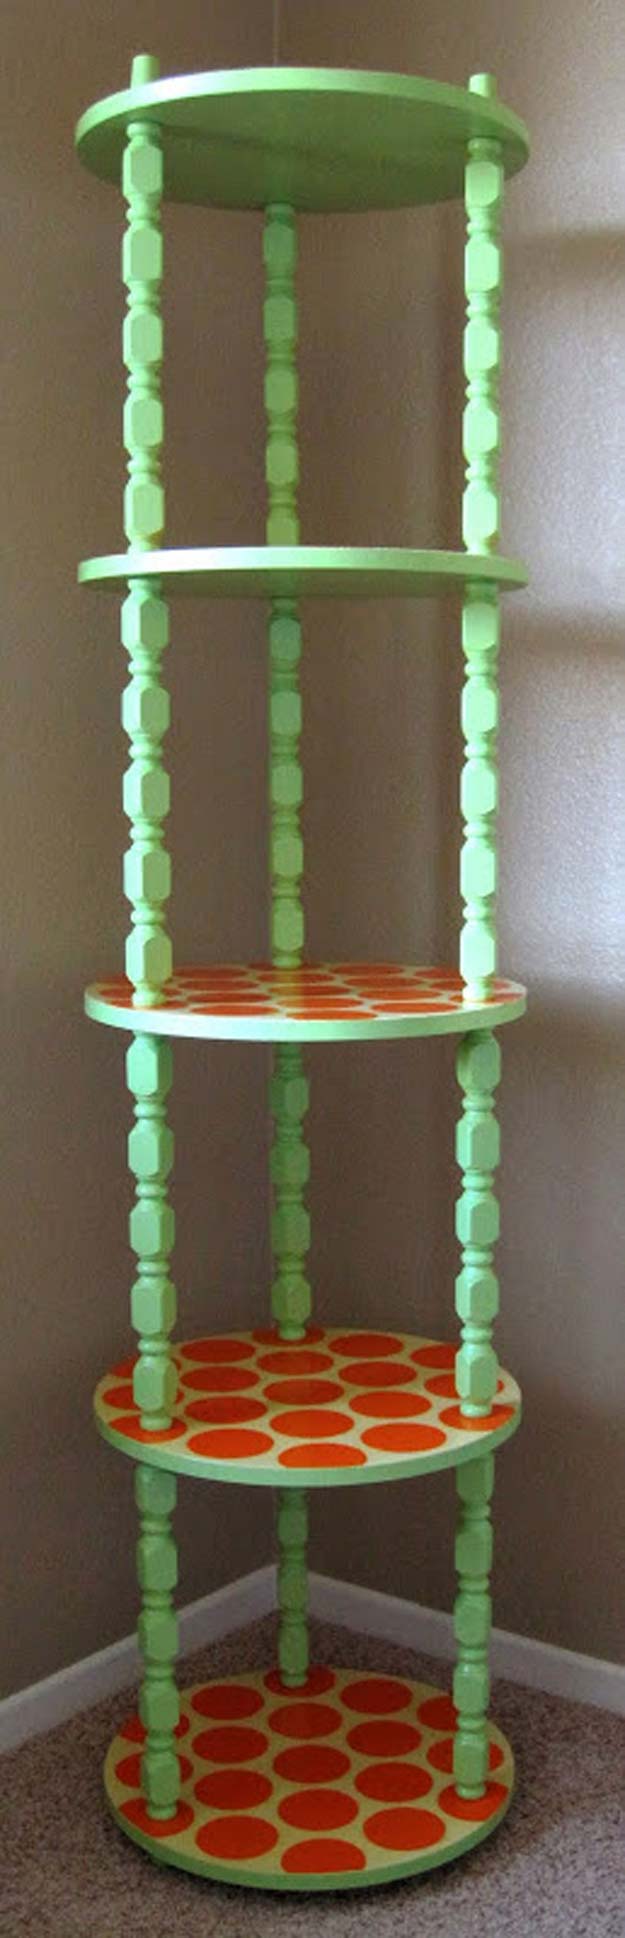 DIY Polka Dot Crafts and Projects - DIY Shelf Makeover - Cool Clothes, Room and Home Decor, Wall Art, Mason Jars and Party Ideas, Canvas, Fabric and Paint Project Tutorials - Fun Craft Ideas for Teens, Kids and Adults Make Awesome DIY Gifts